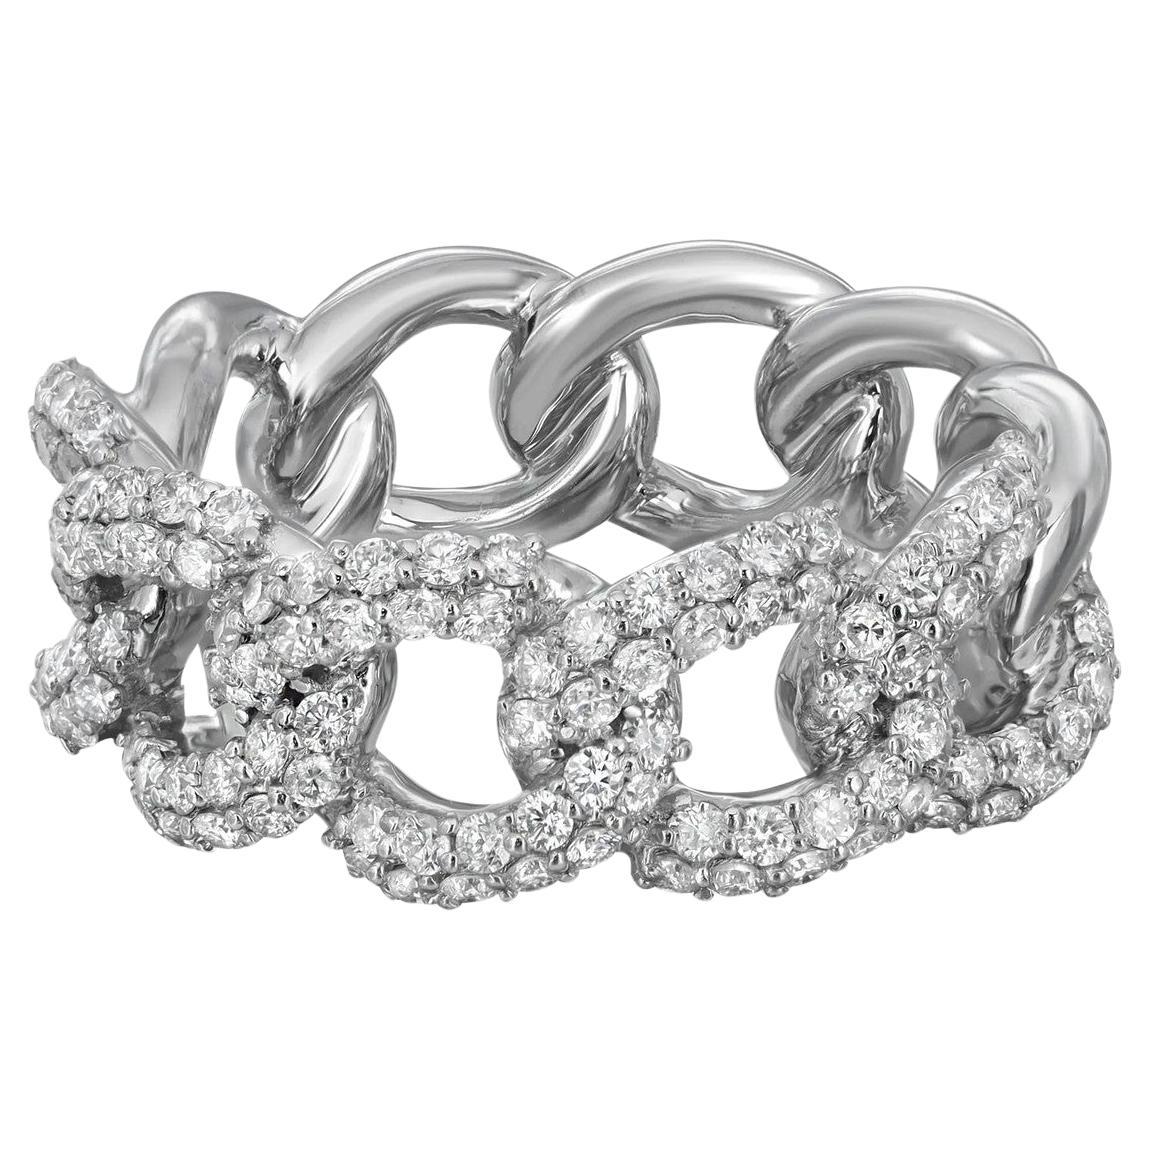 For Sale:  Elizabeth Fine Jewelry 1.00 Carat Diamond Chain Link Band Ring 18k White Gold